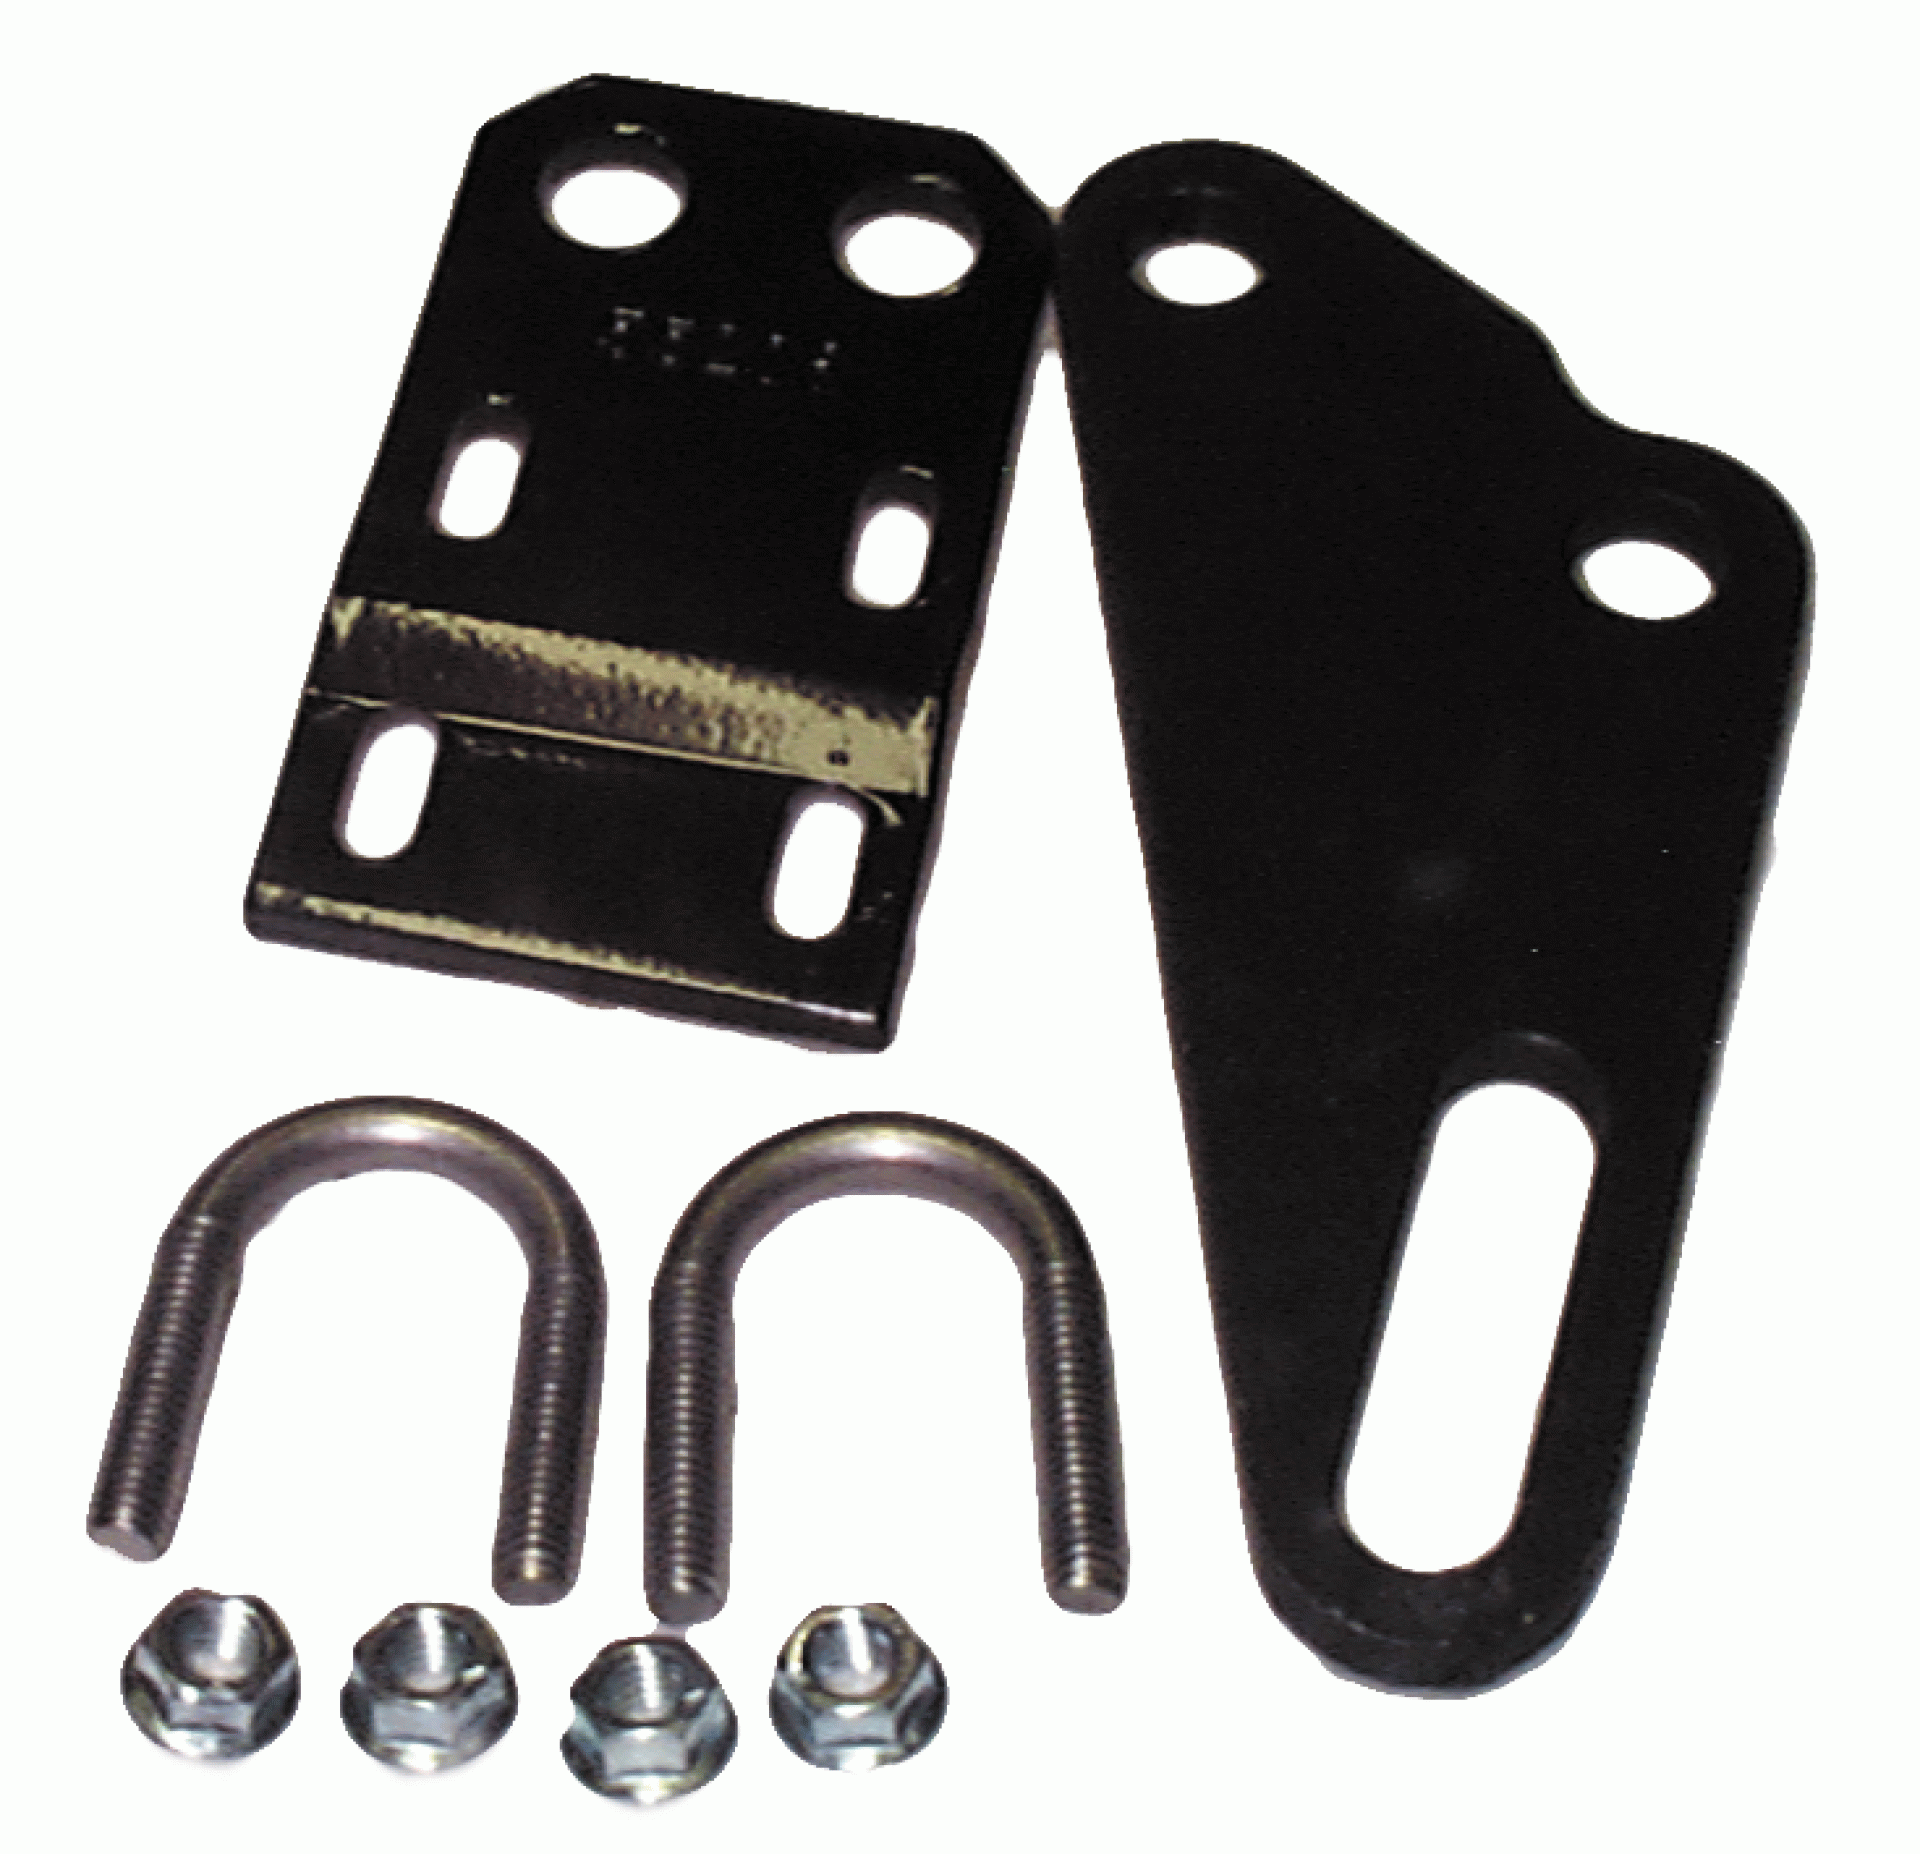 SAFE T PLUS | F-53K2 | MOUNTING HARDWARE for Ford Prior 1994 F53 Super Duty Class A